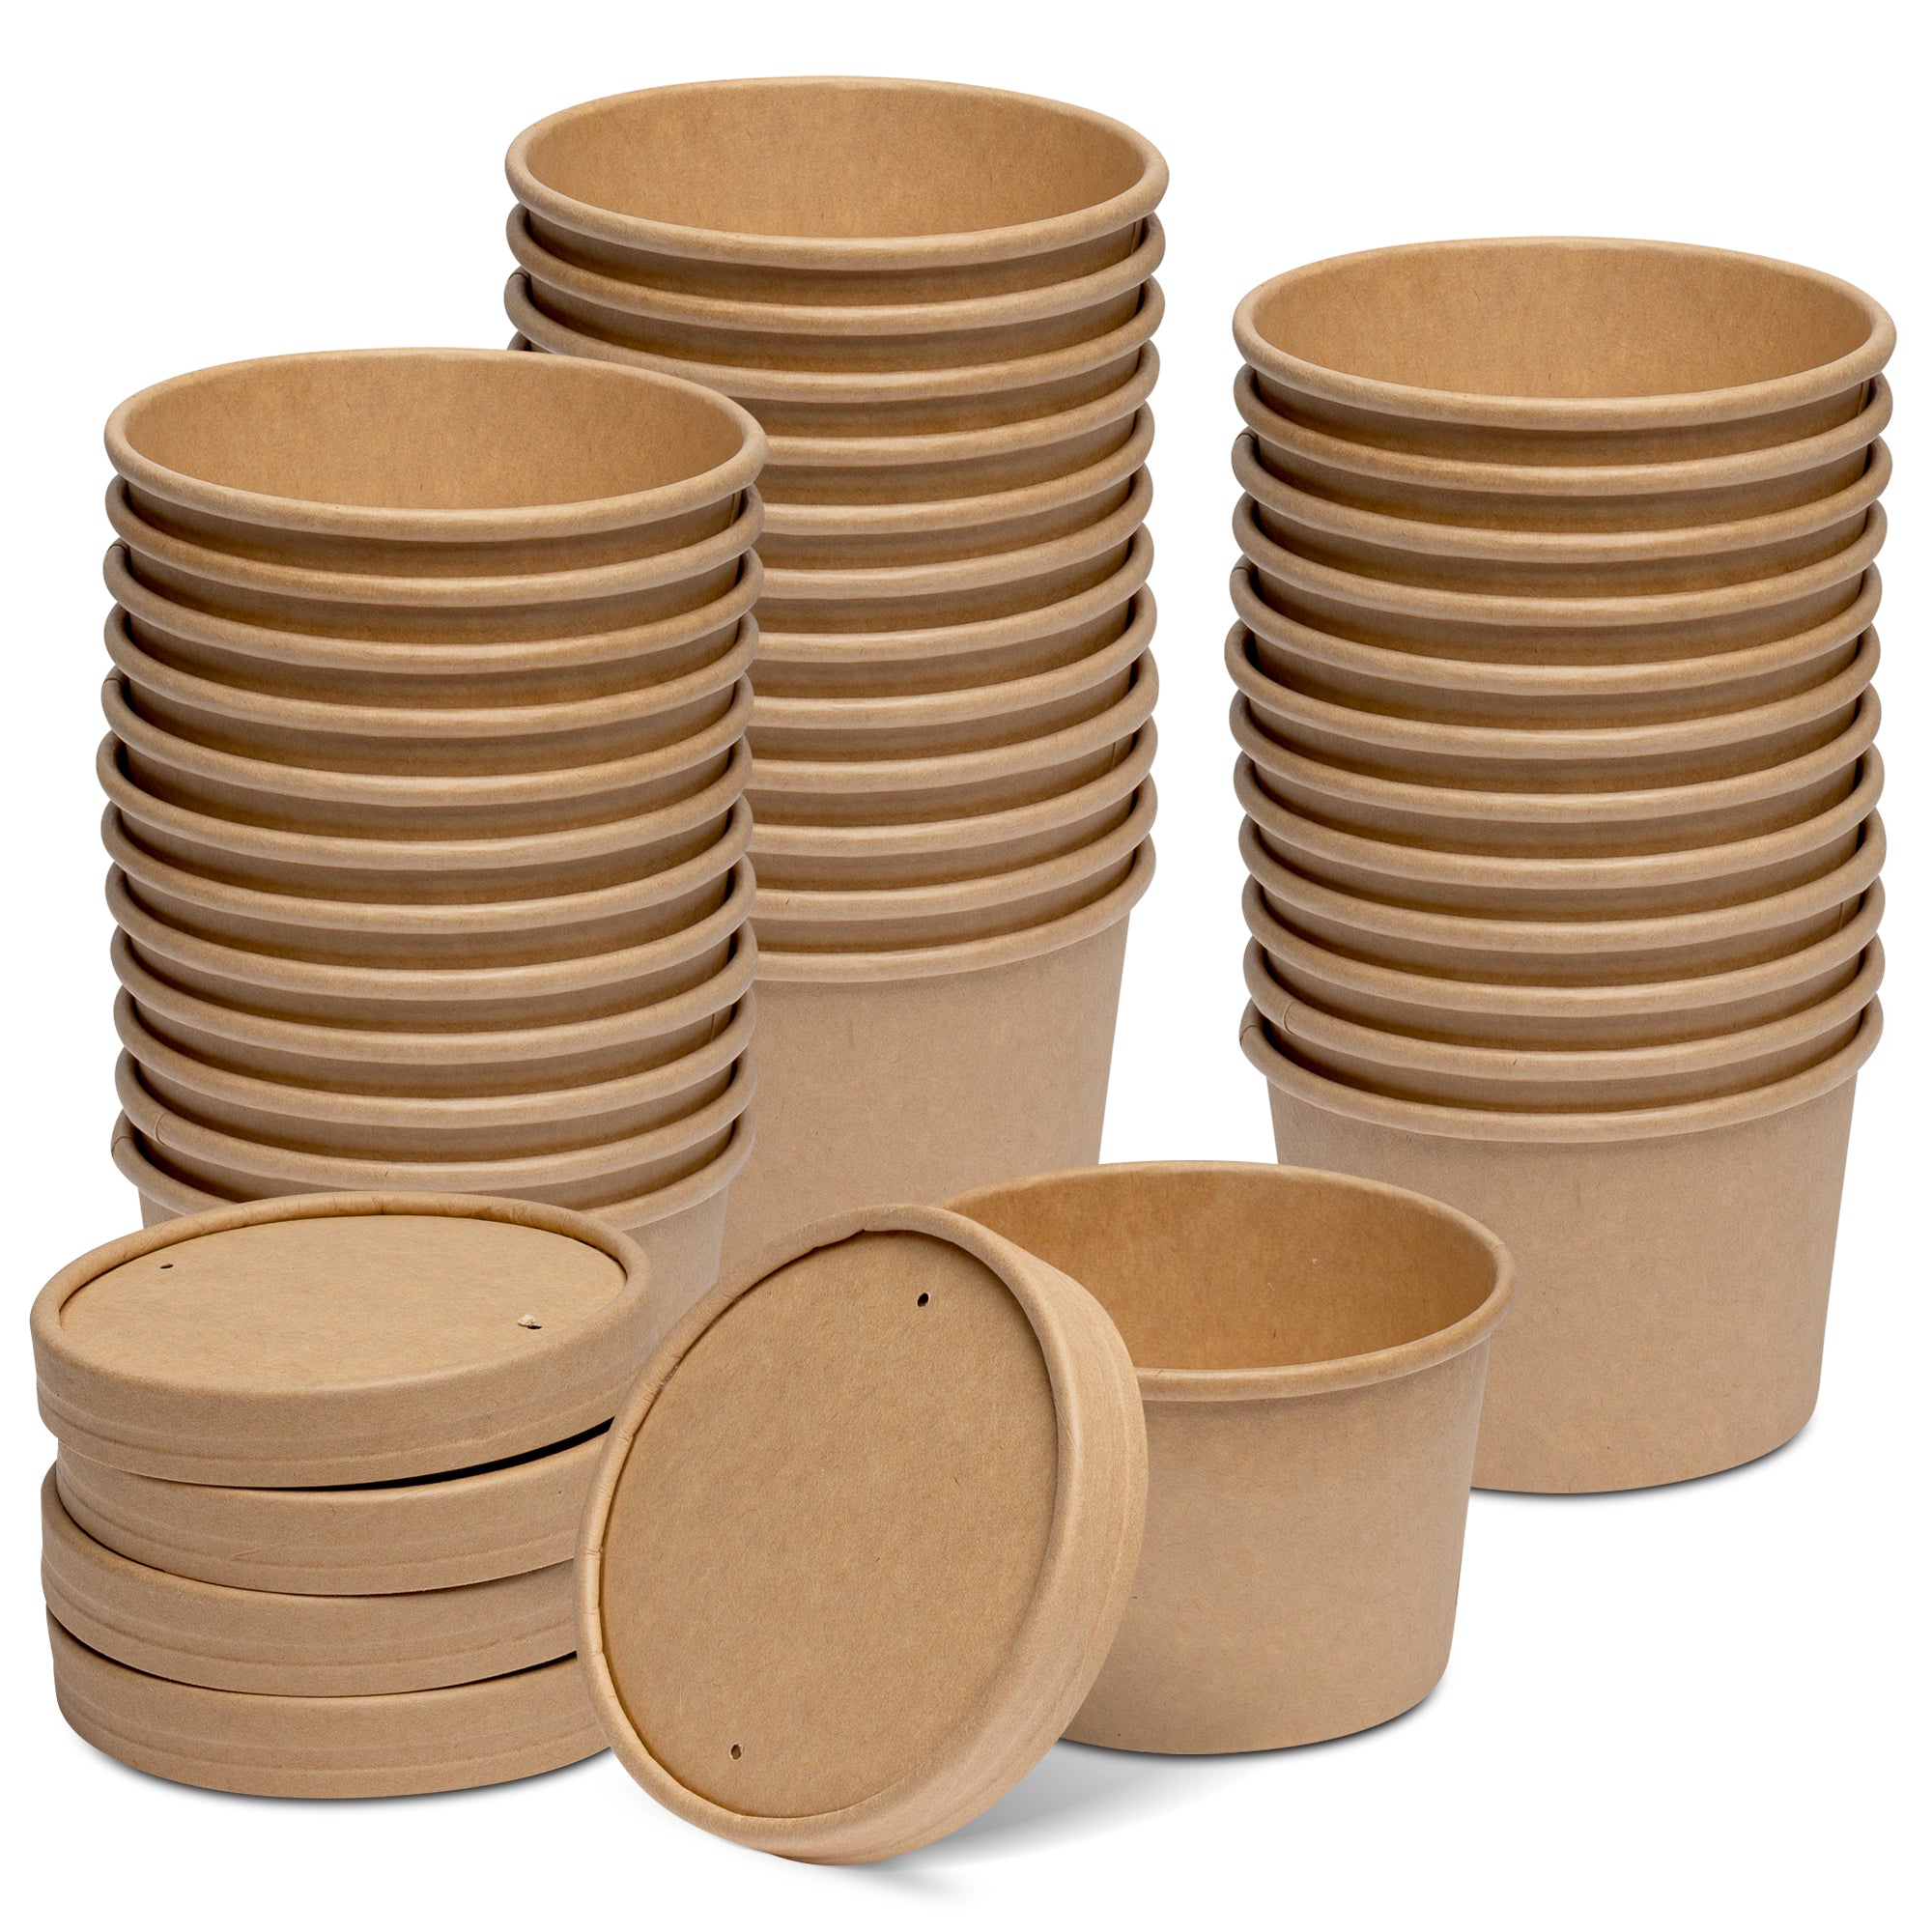 Jolly Party 50Pack 8oz Paper Soup Containers with Lids, Disposable Kraft Paper Food Cups, Ice Cream Cups, Paper Food Storage with Vented Lids